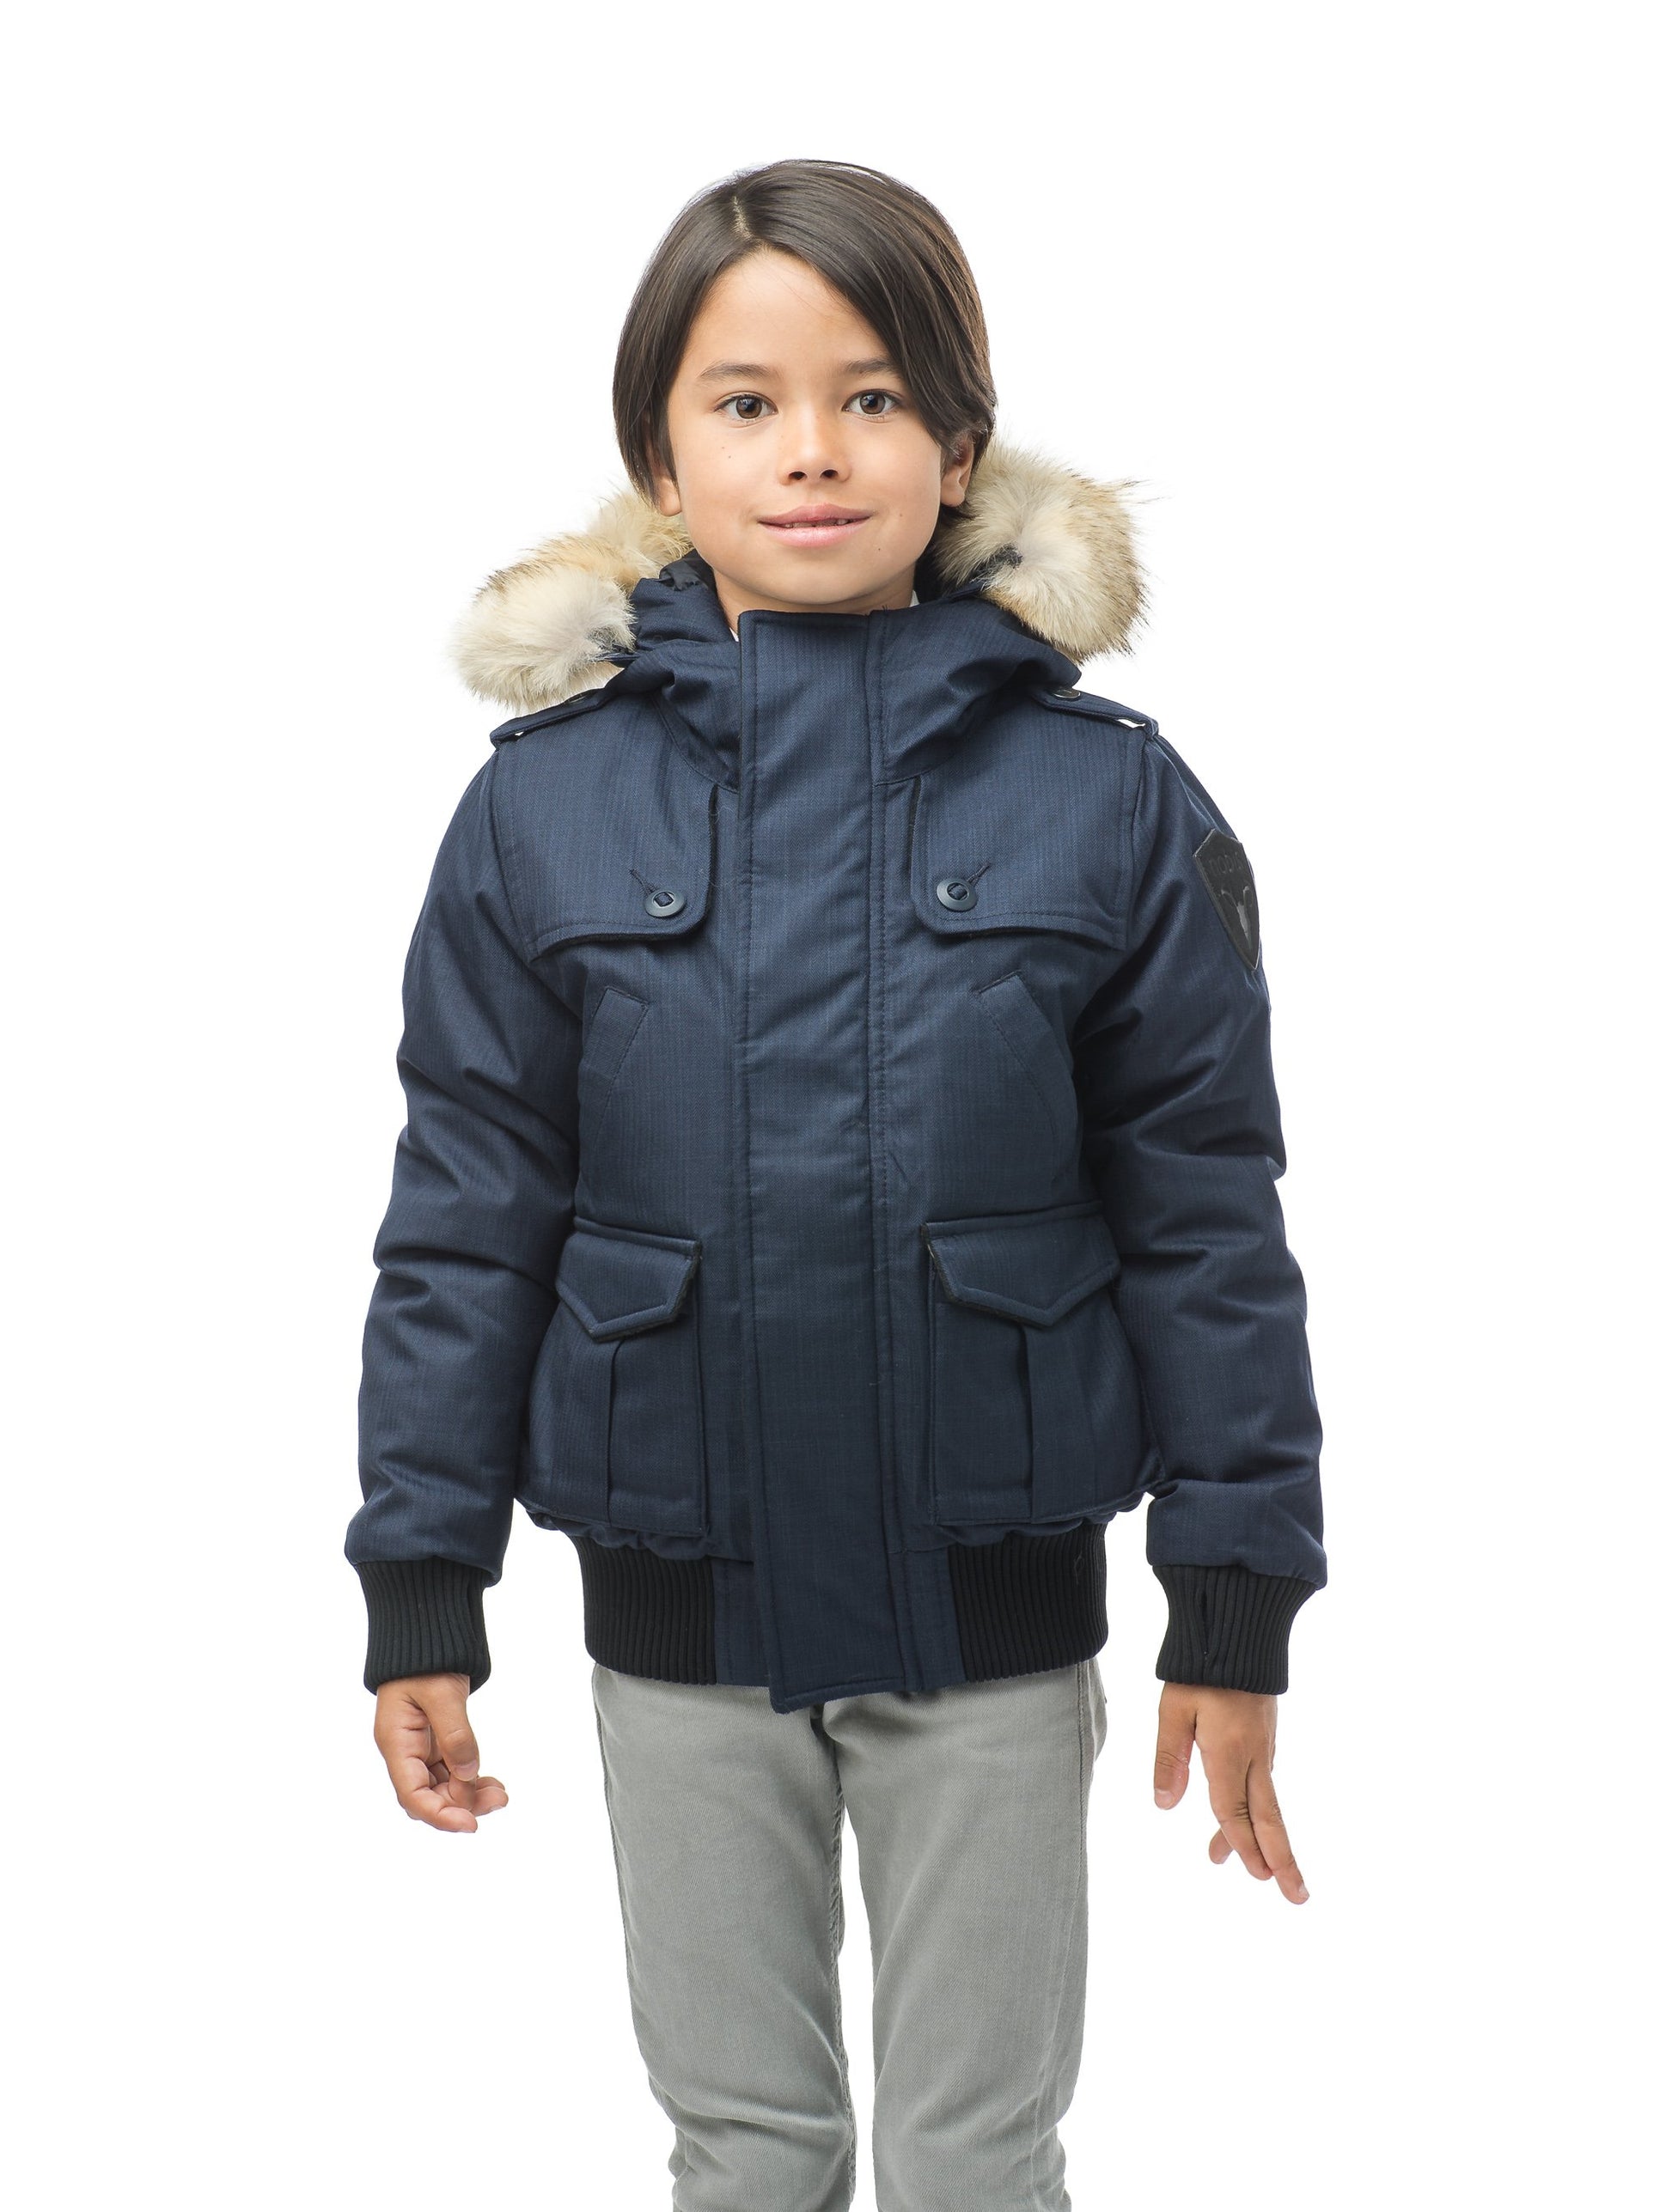 Kid's waist length down bomber jacket with fur trim hood in CH Navy